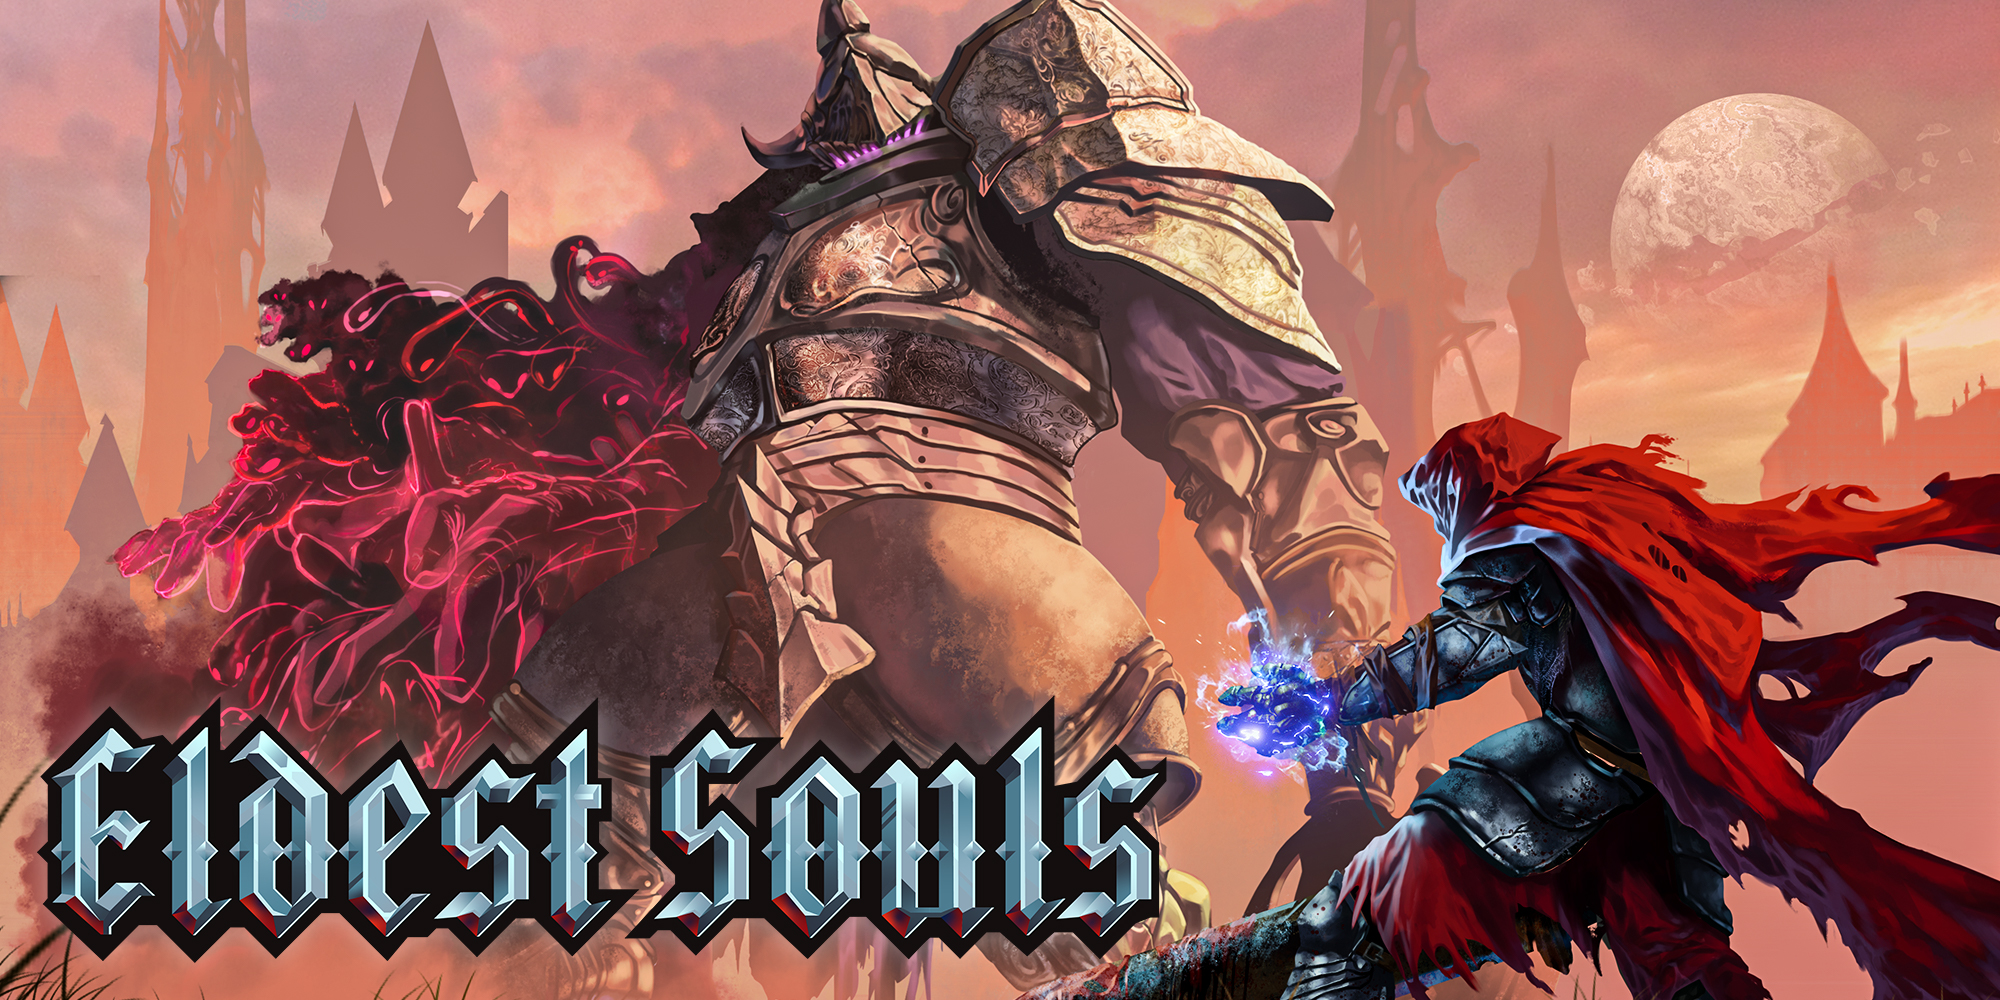 Artwork for the Eldest Souls video game. A hooded figure in a tattered cloak and armour is weilding a sword, with magical power rippling from a clenched fist. He is dwarfed by a huge boss, in massive plate armour, with evil-looking red and black magic spewing from its arm.